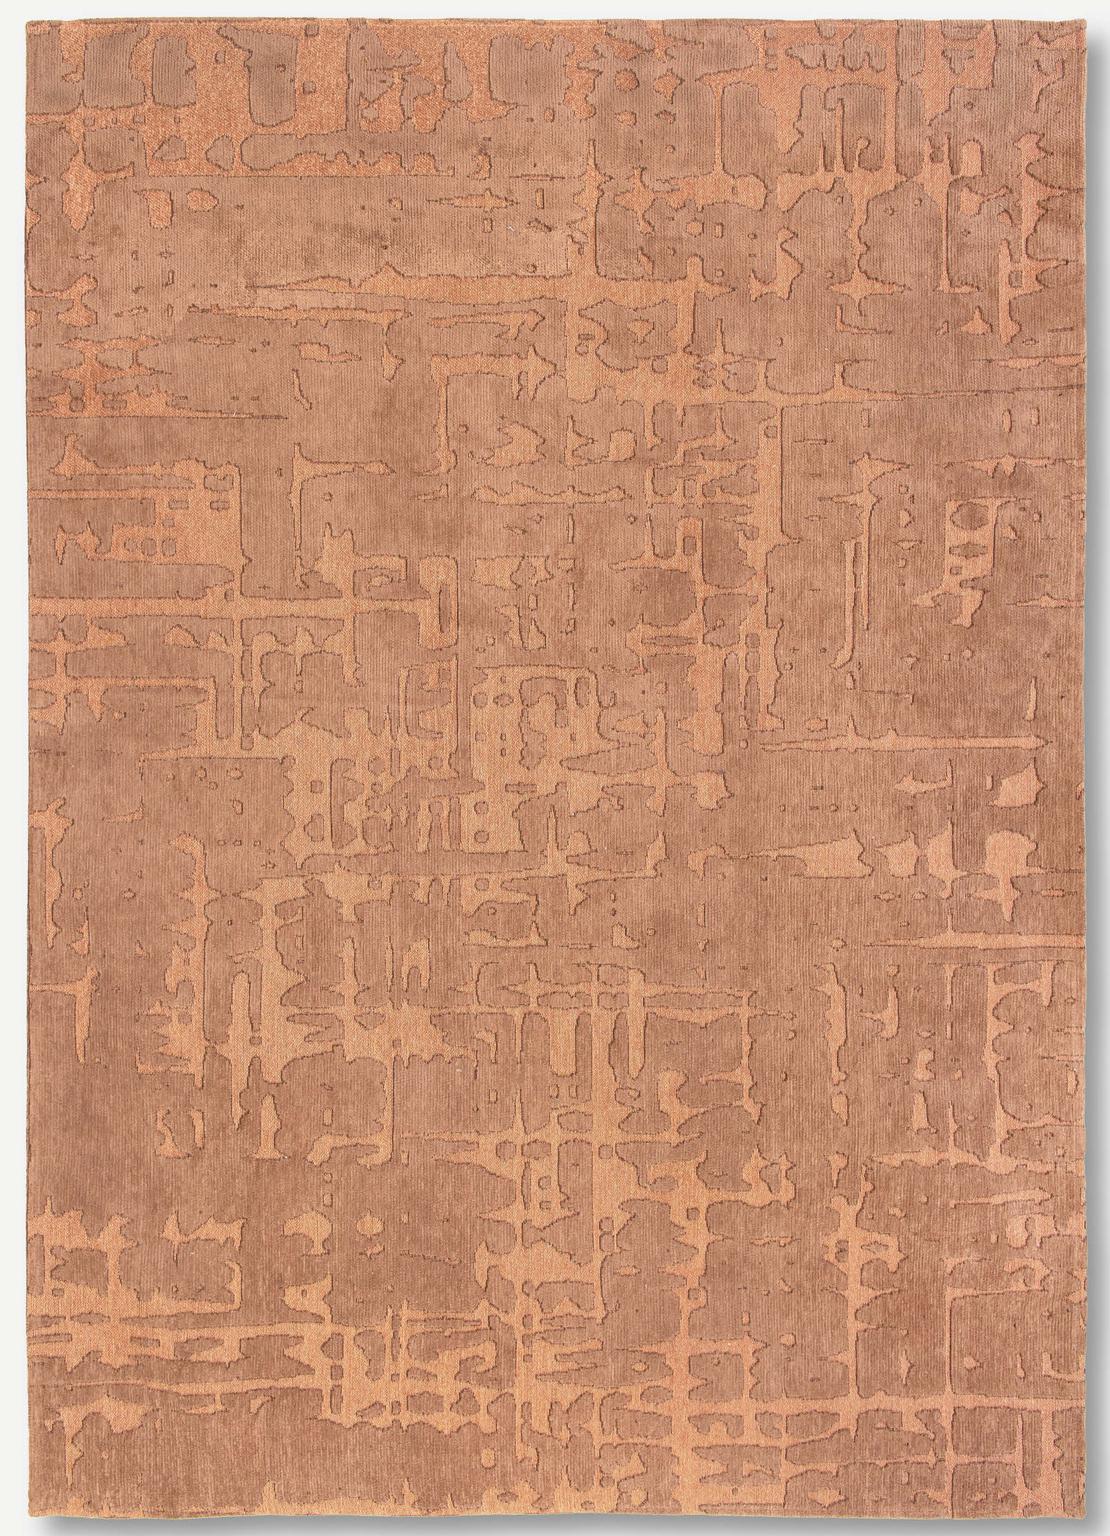 Abstract Brown Belgian Rug ☞ Size: 2' 7" x 5' (80 x 150 cm)